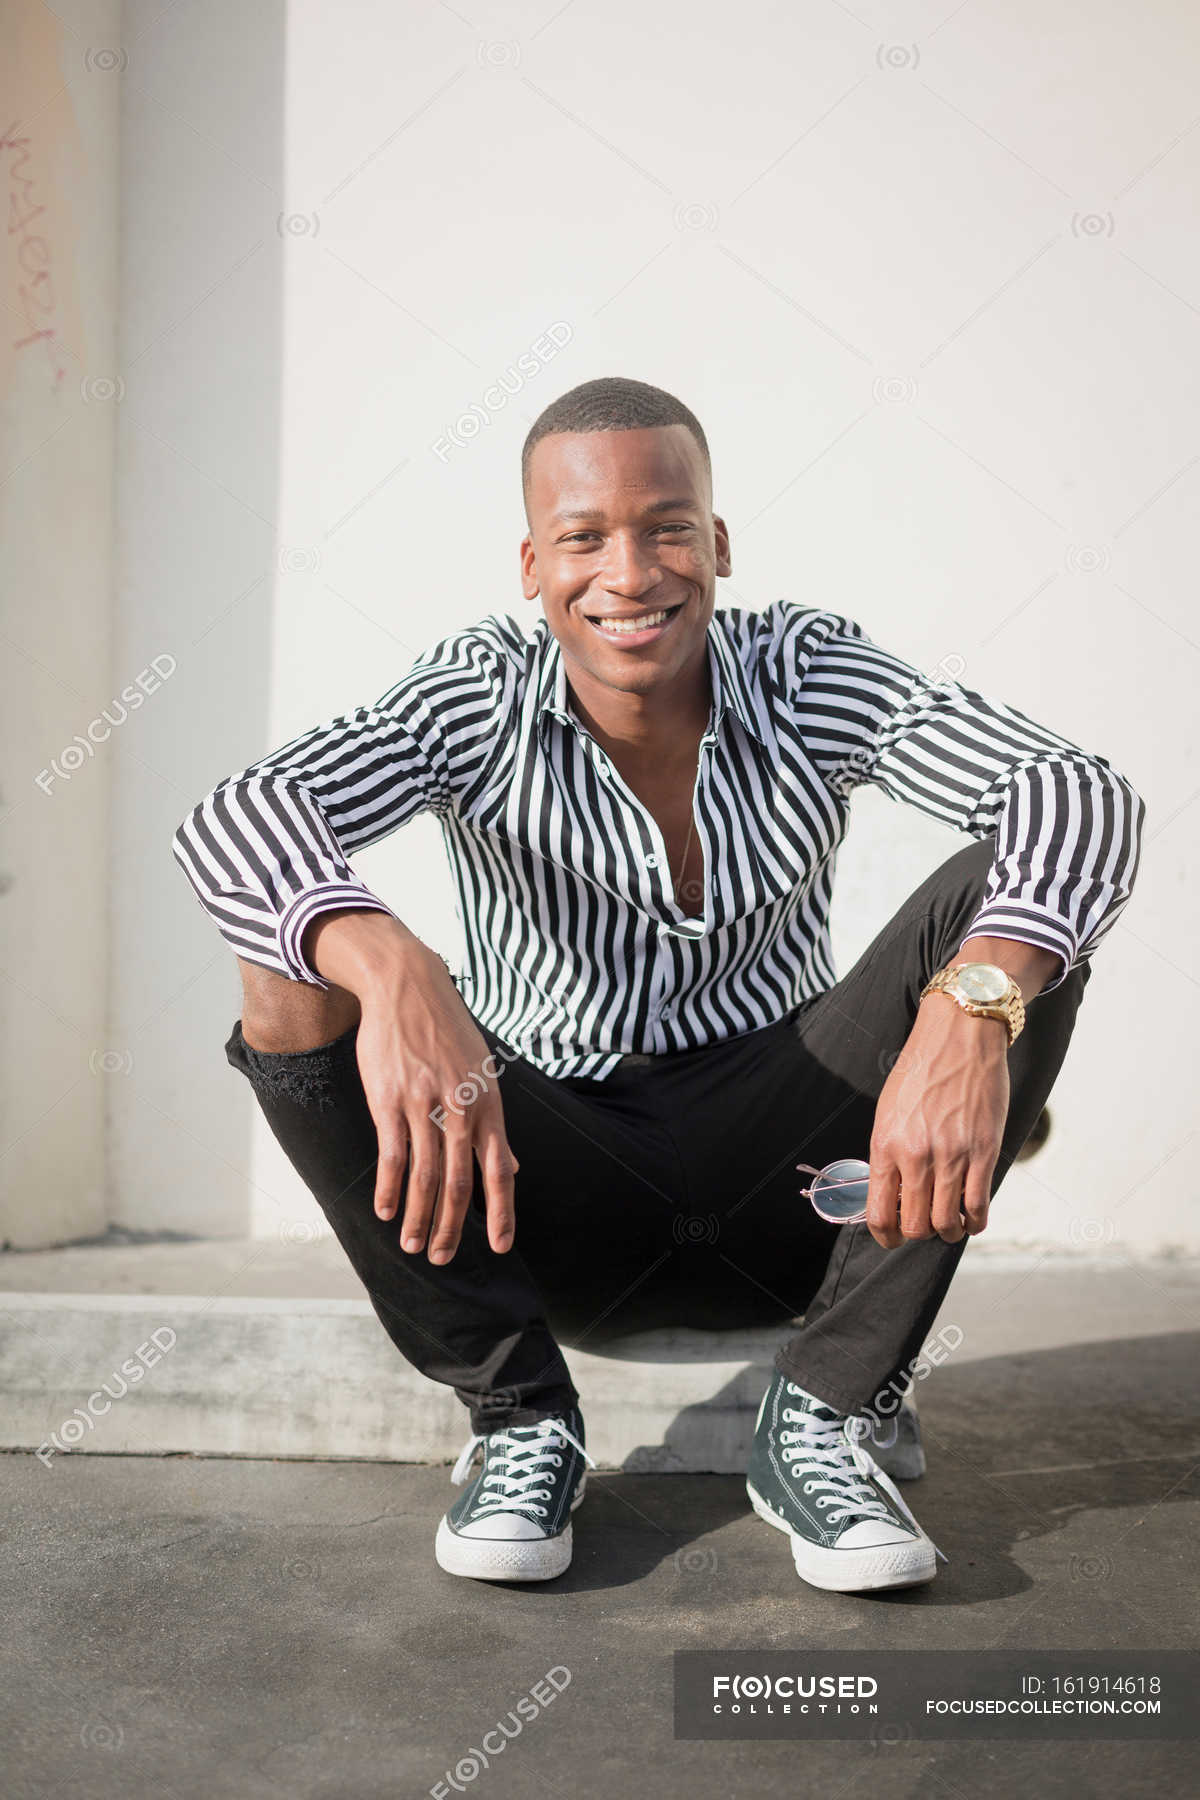 Young man sitting on kerb — Stock Photo | #161914618